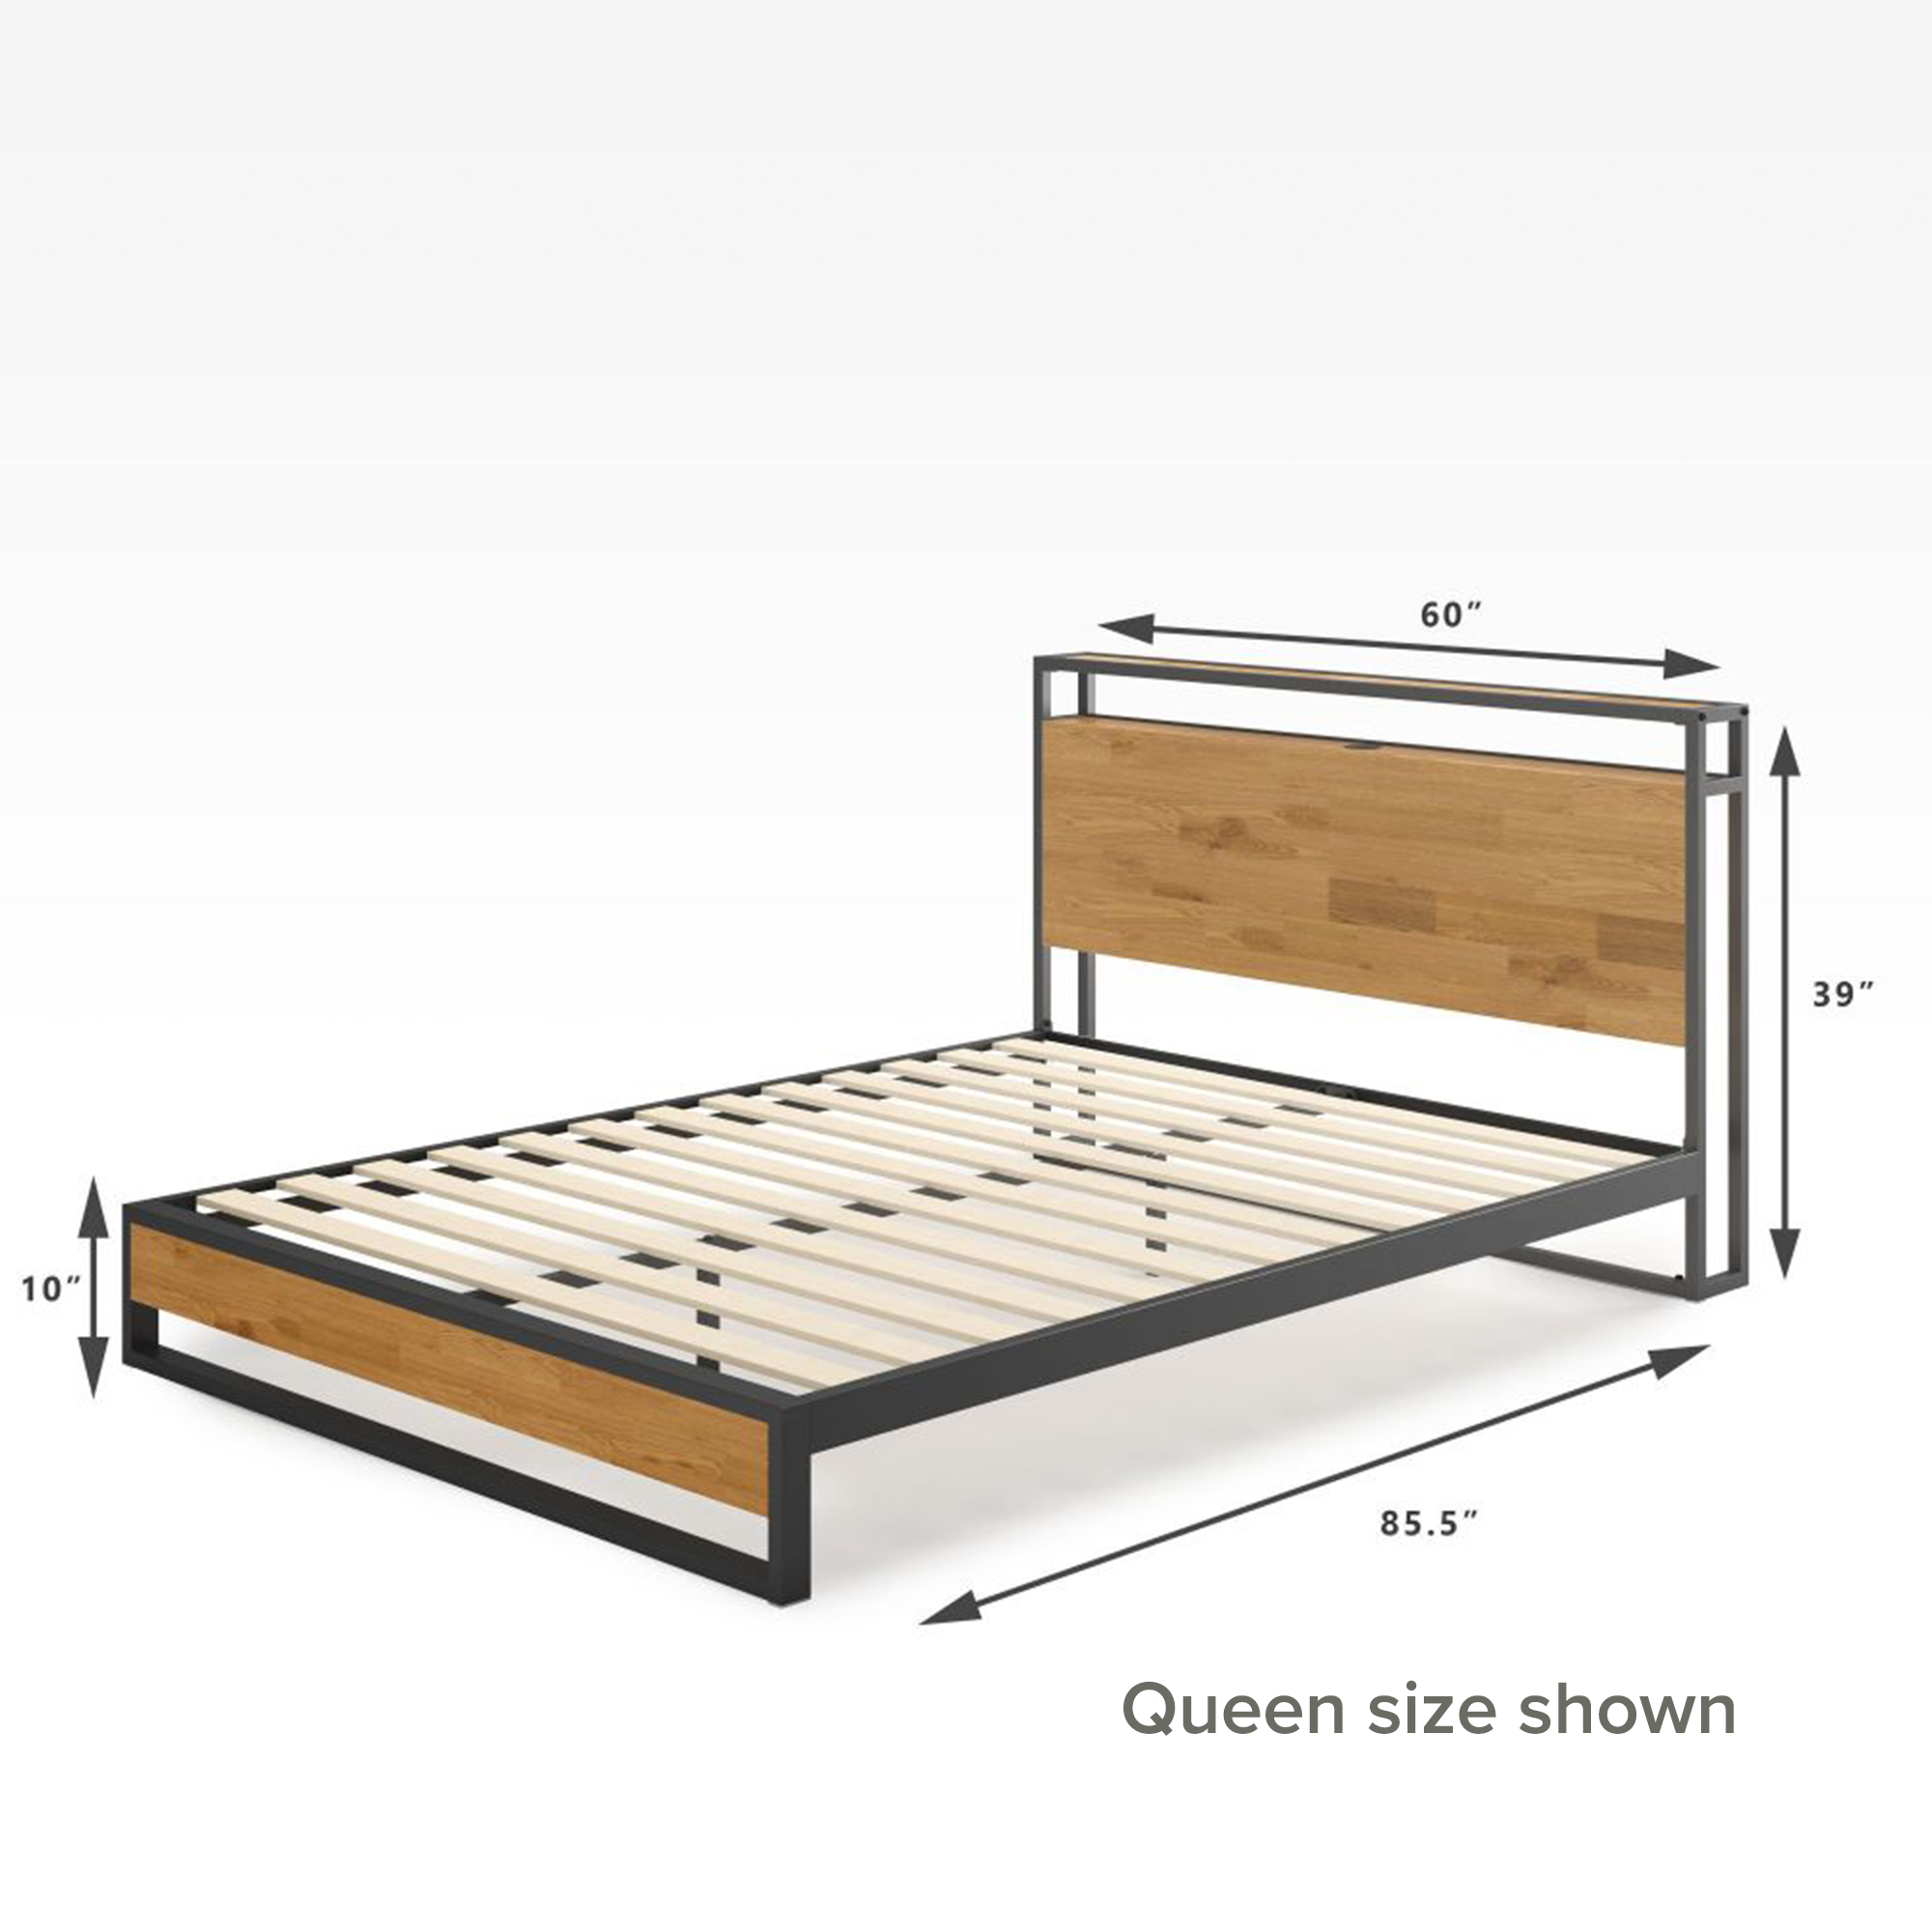 Suzanne Metal and Wood Platform Bed Frame with Headboard Shelf and USB Port Queen Size Dimensions